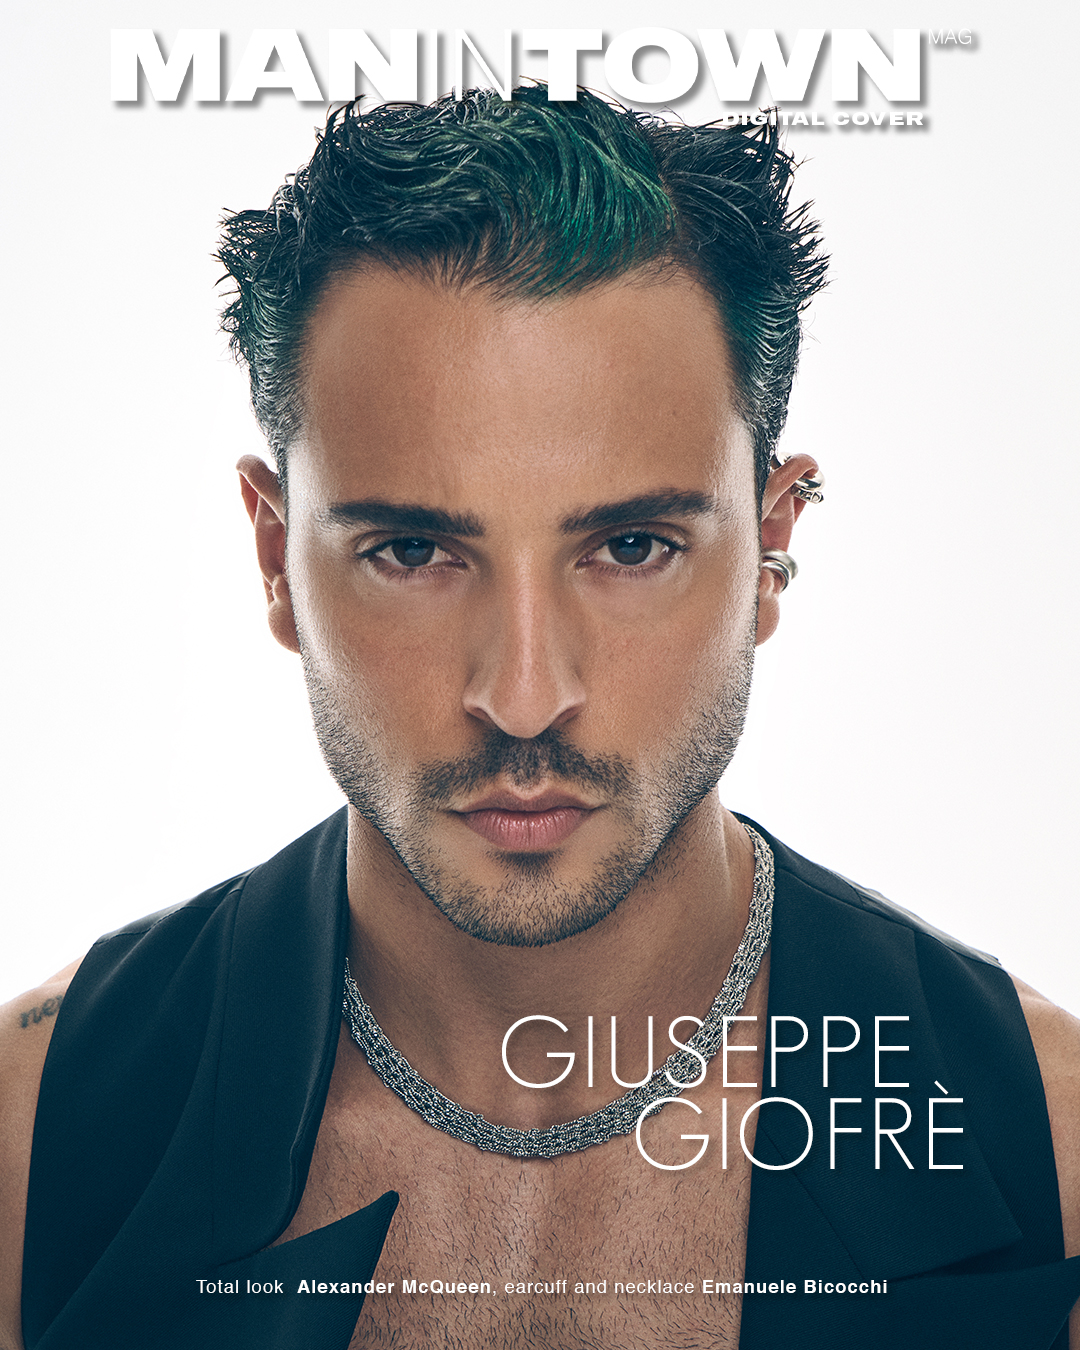 GIUSEPPE GIOFRE' - MAN IN TOWN by Andrea Reina